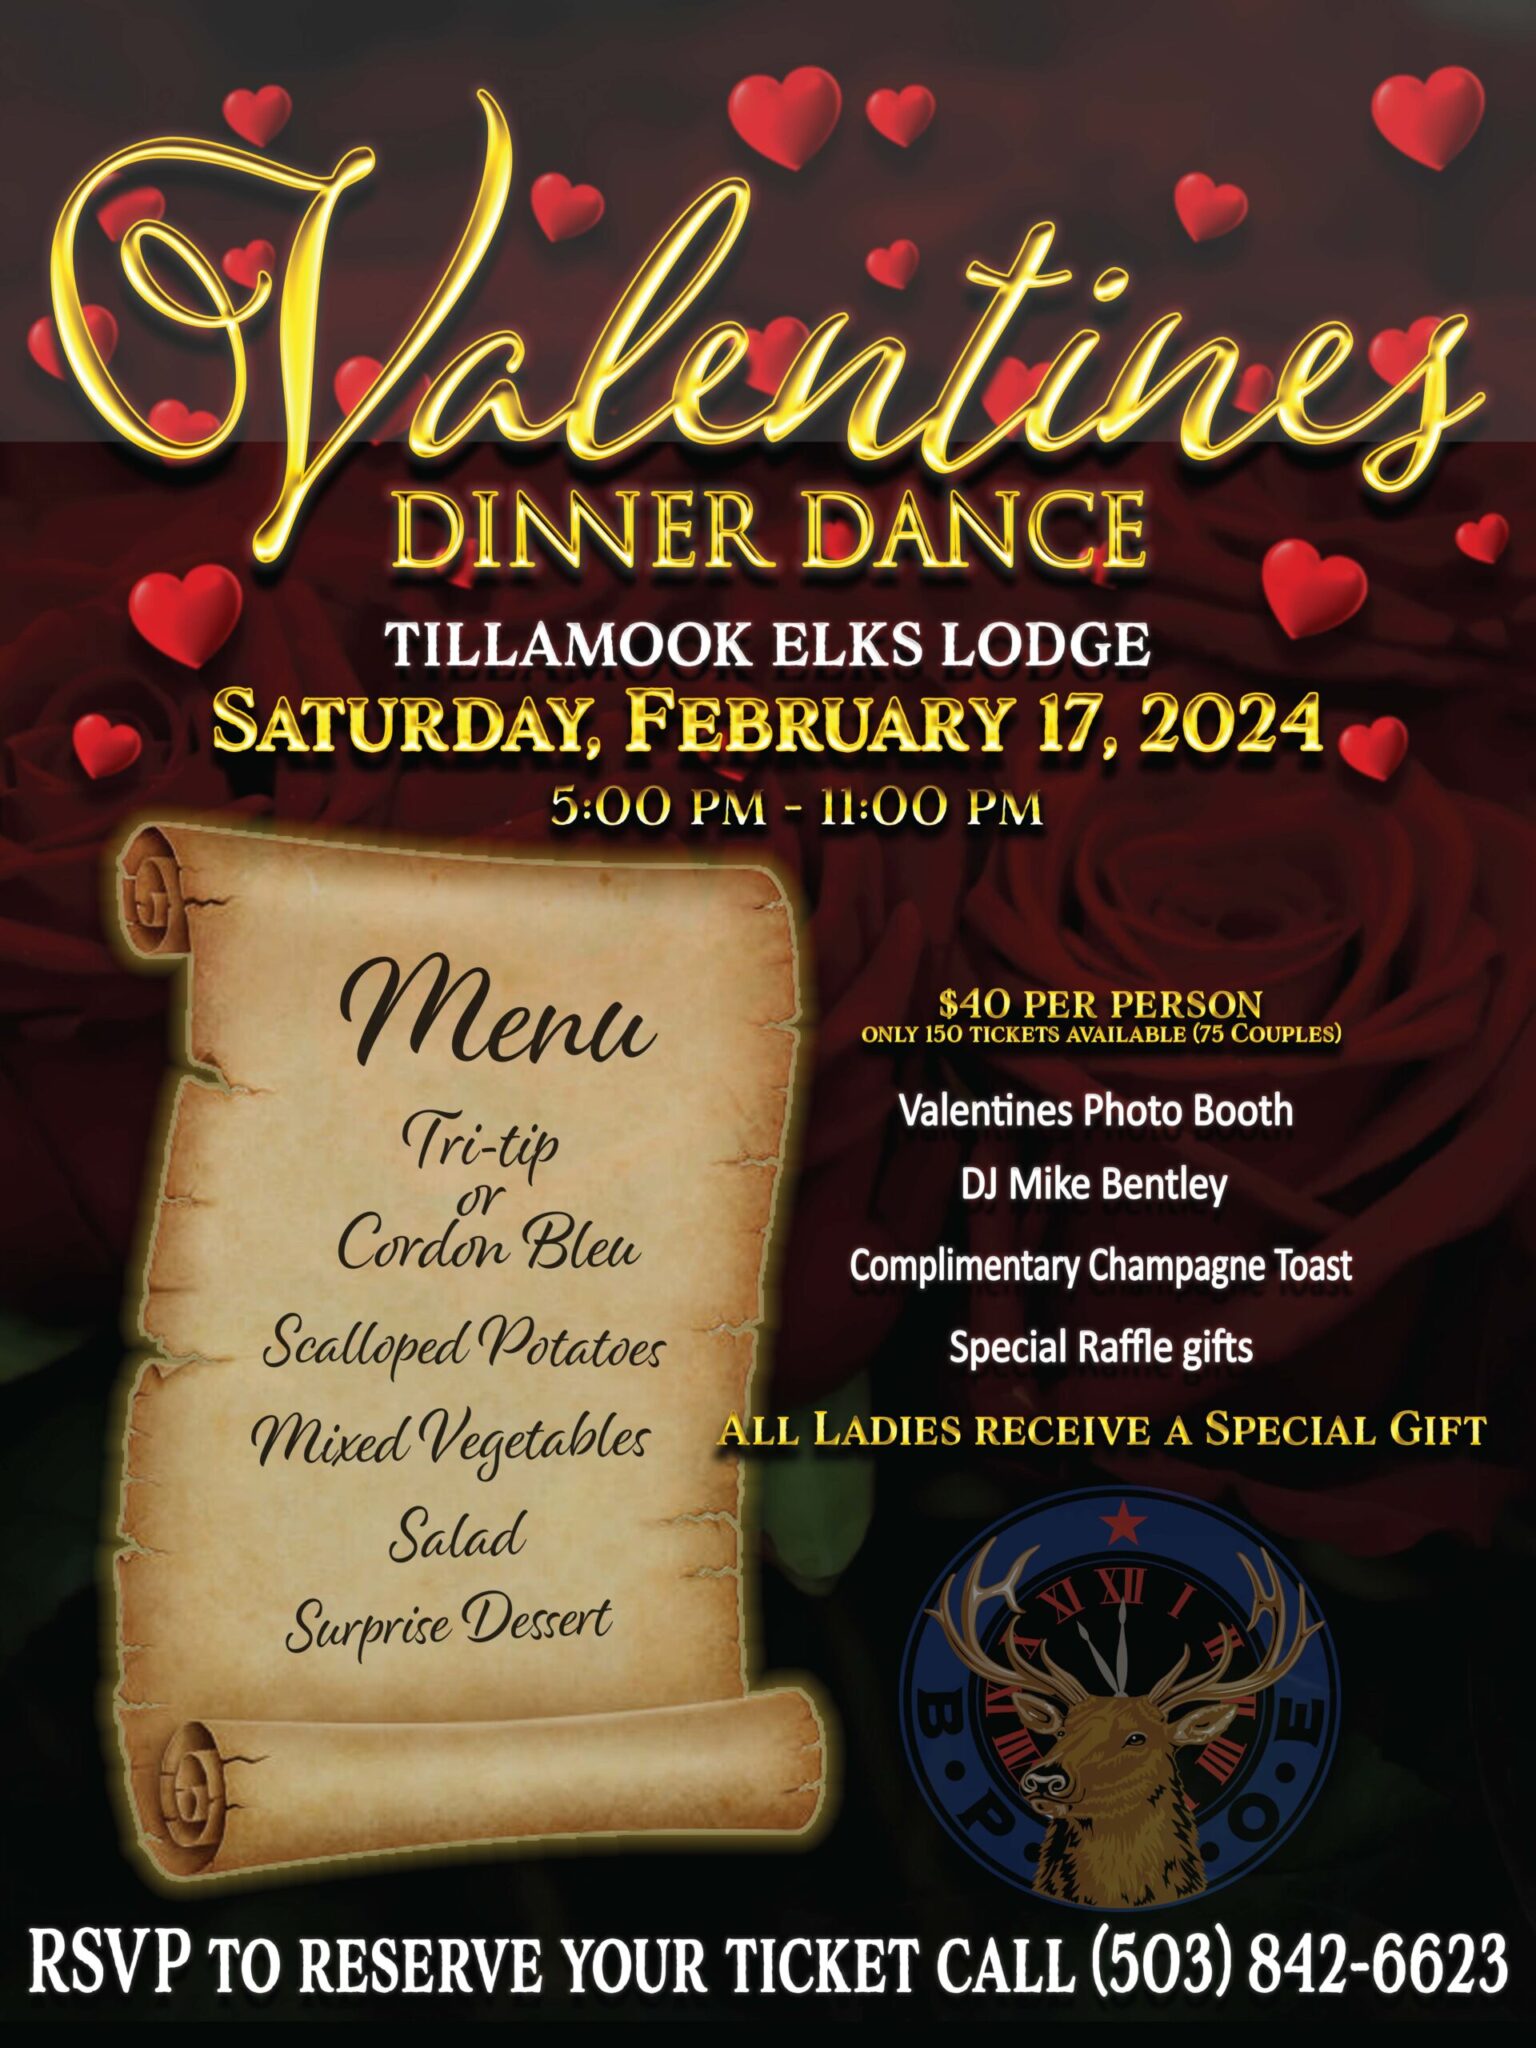 Valentines Flyer 002 scaled 7Zks6M.tmp